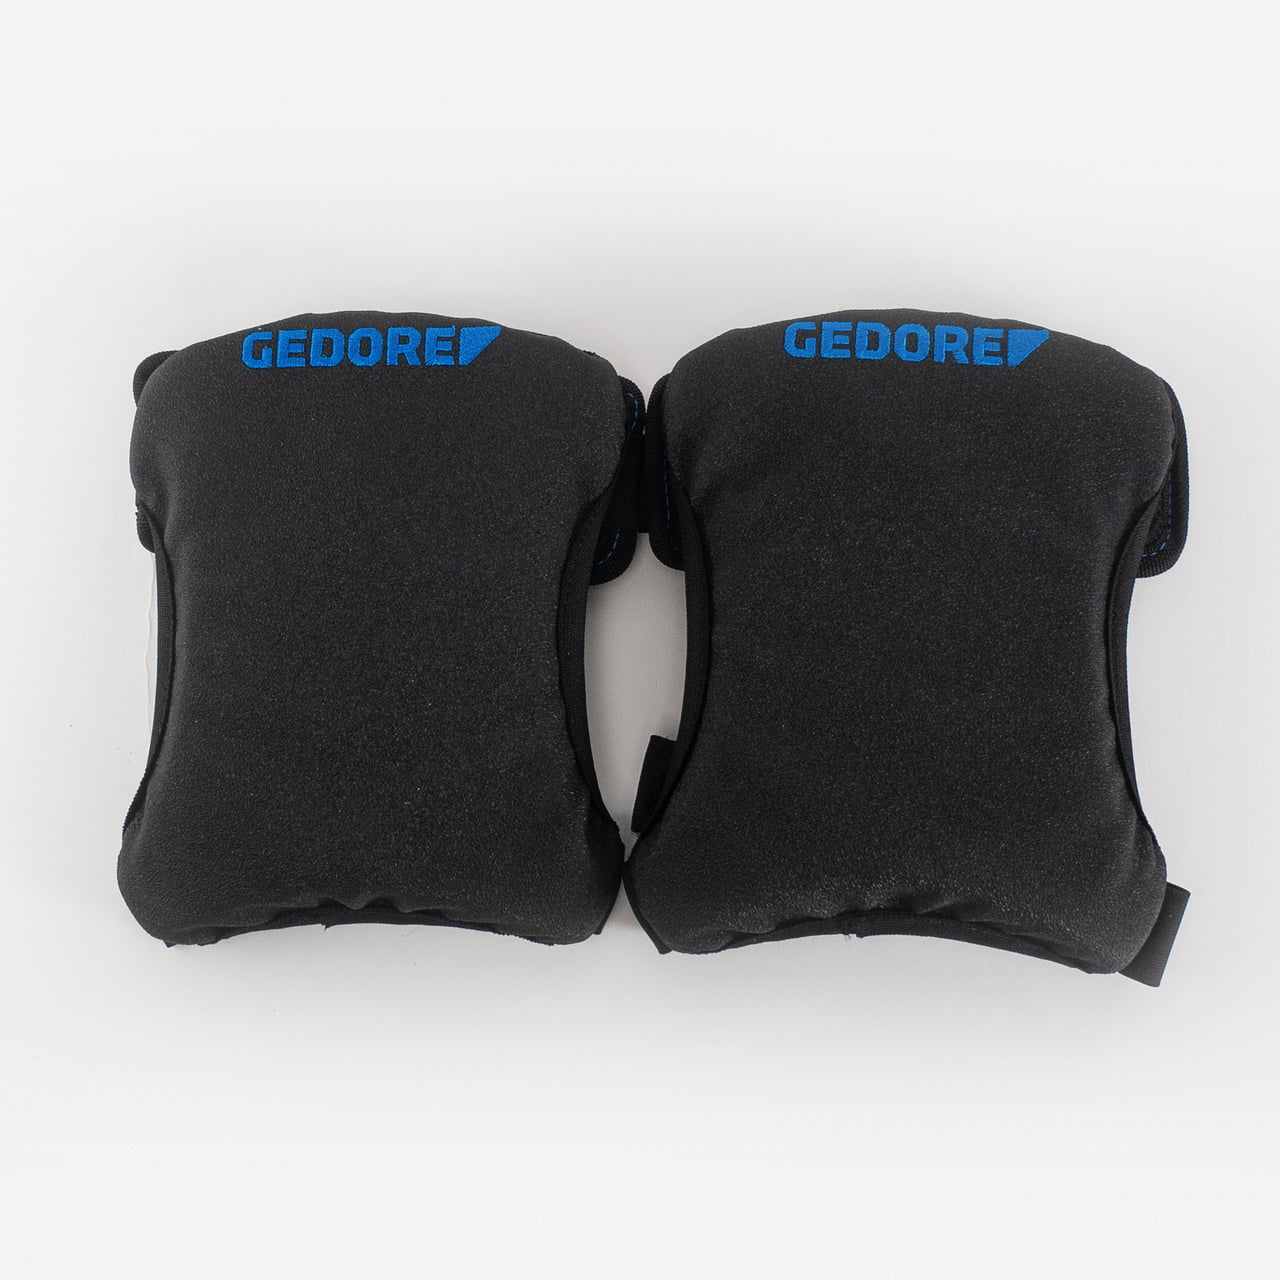 SAS Safety 7105 Deluxe Gel Knee Pads for sale online 